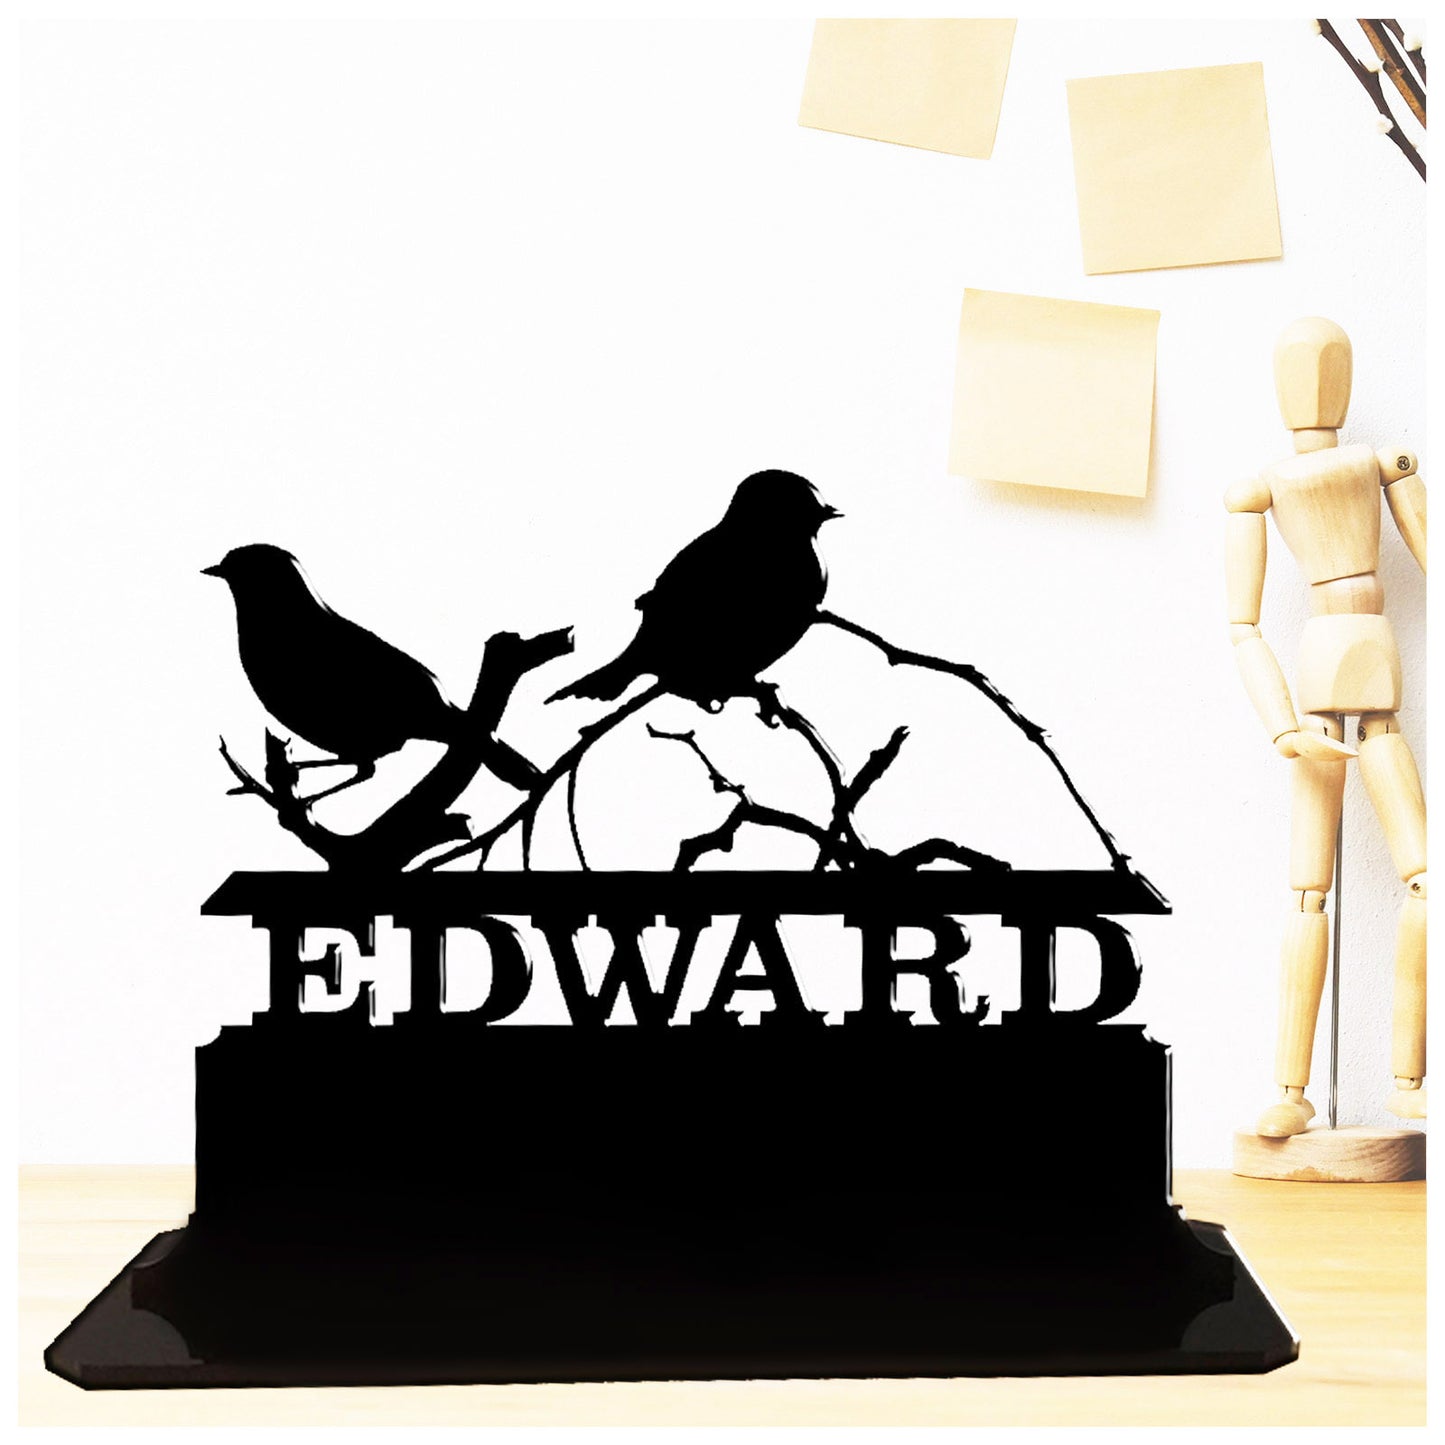 Acrylic personalized gift ideas for sparrow lovers. Standalone keepsake ornaments.